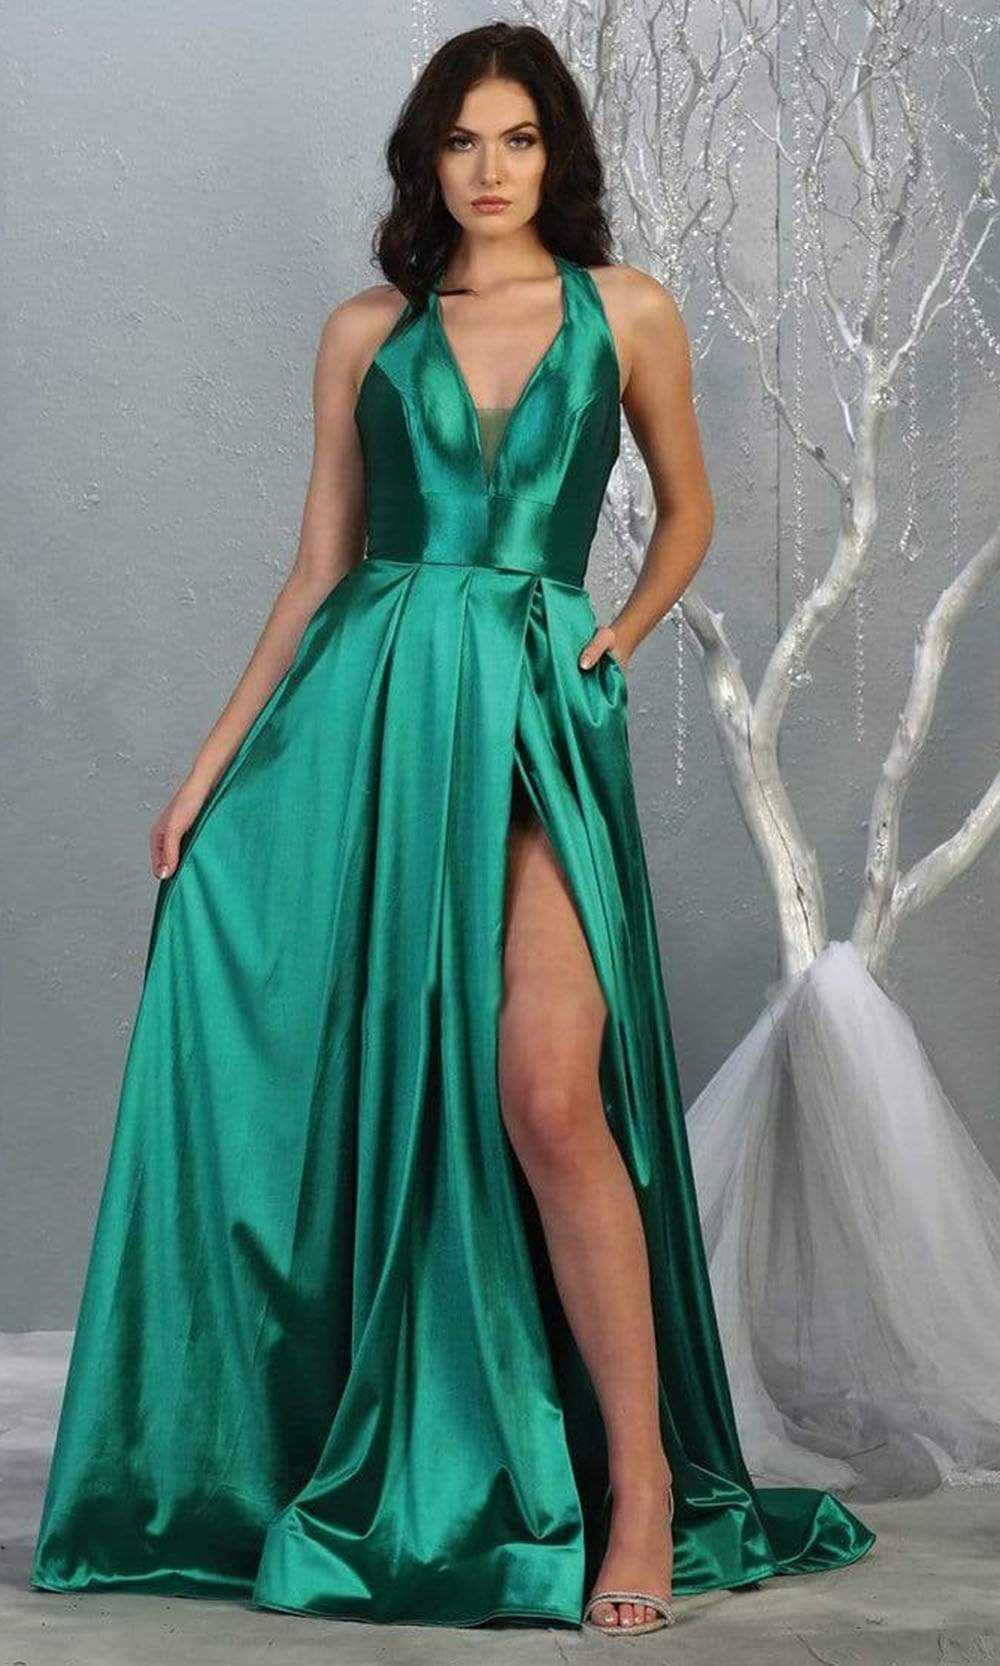 May Queen - MQ1741 Deep V-neck Pleated A-line Dress Prom Dresses 4 / Emerald Gr